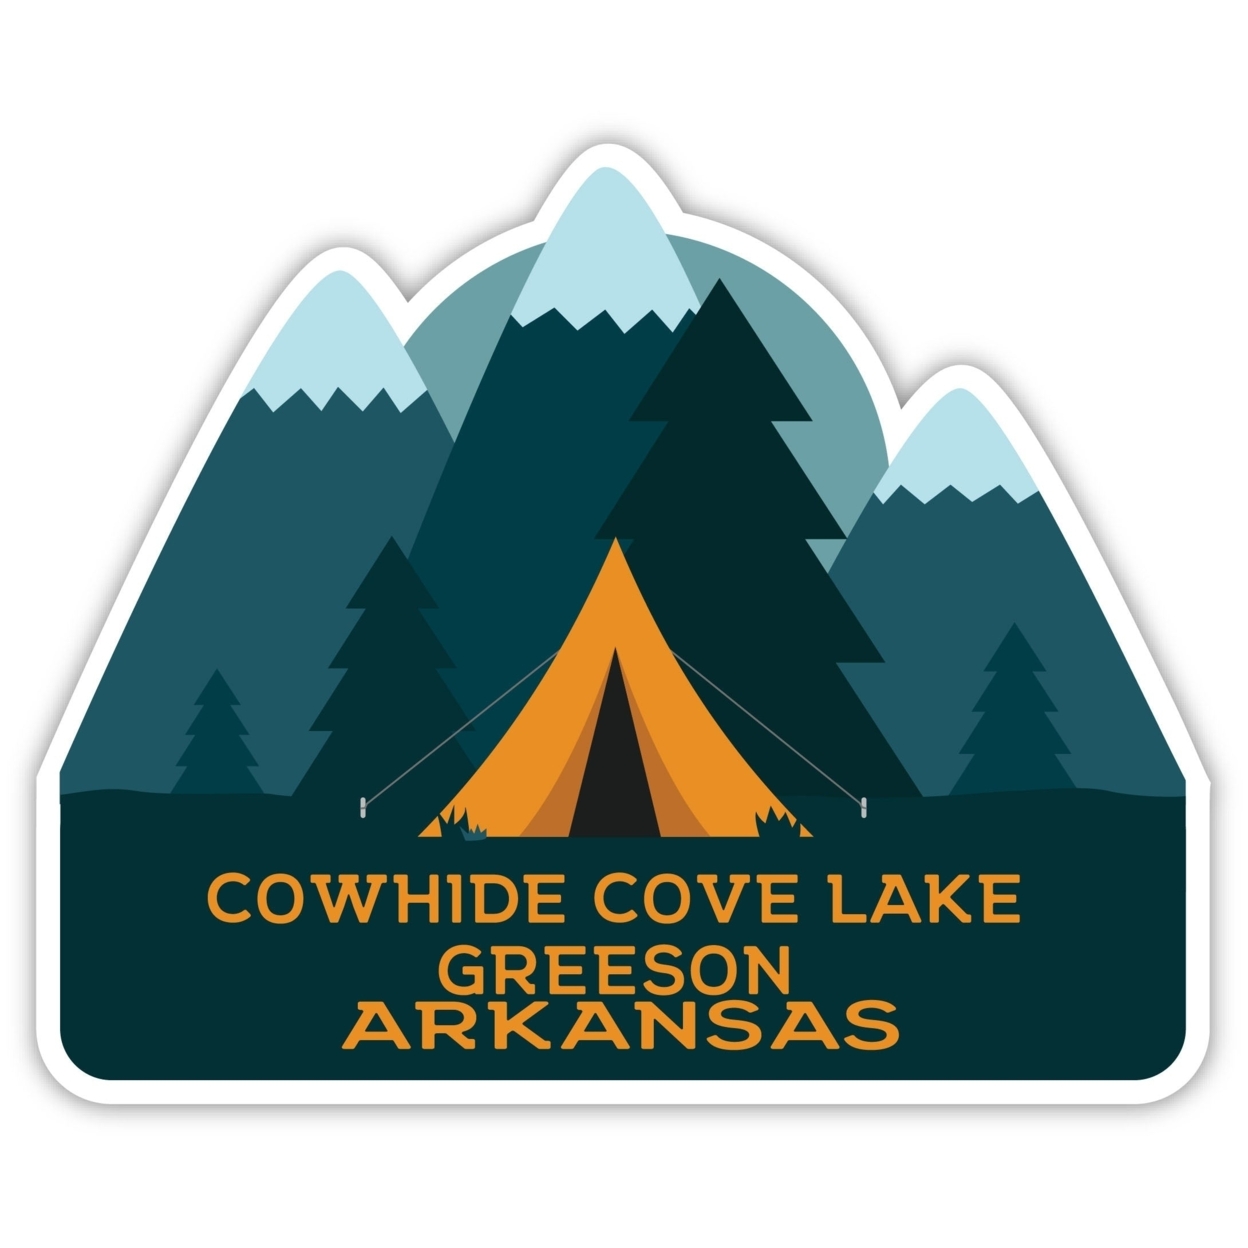 Cowhide Cove Lake Greeson Arkansas Souvenir Decorative Stickers (Choose Theme And Size) - 4-Pack, 2-Inch, Tent